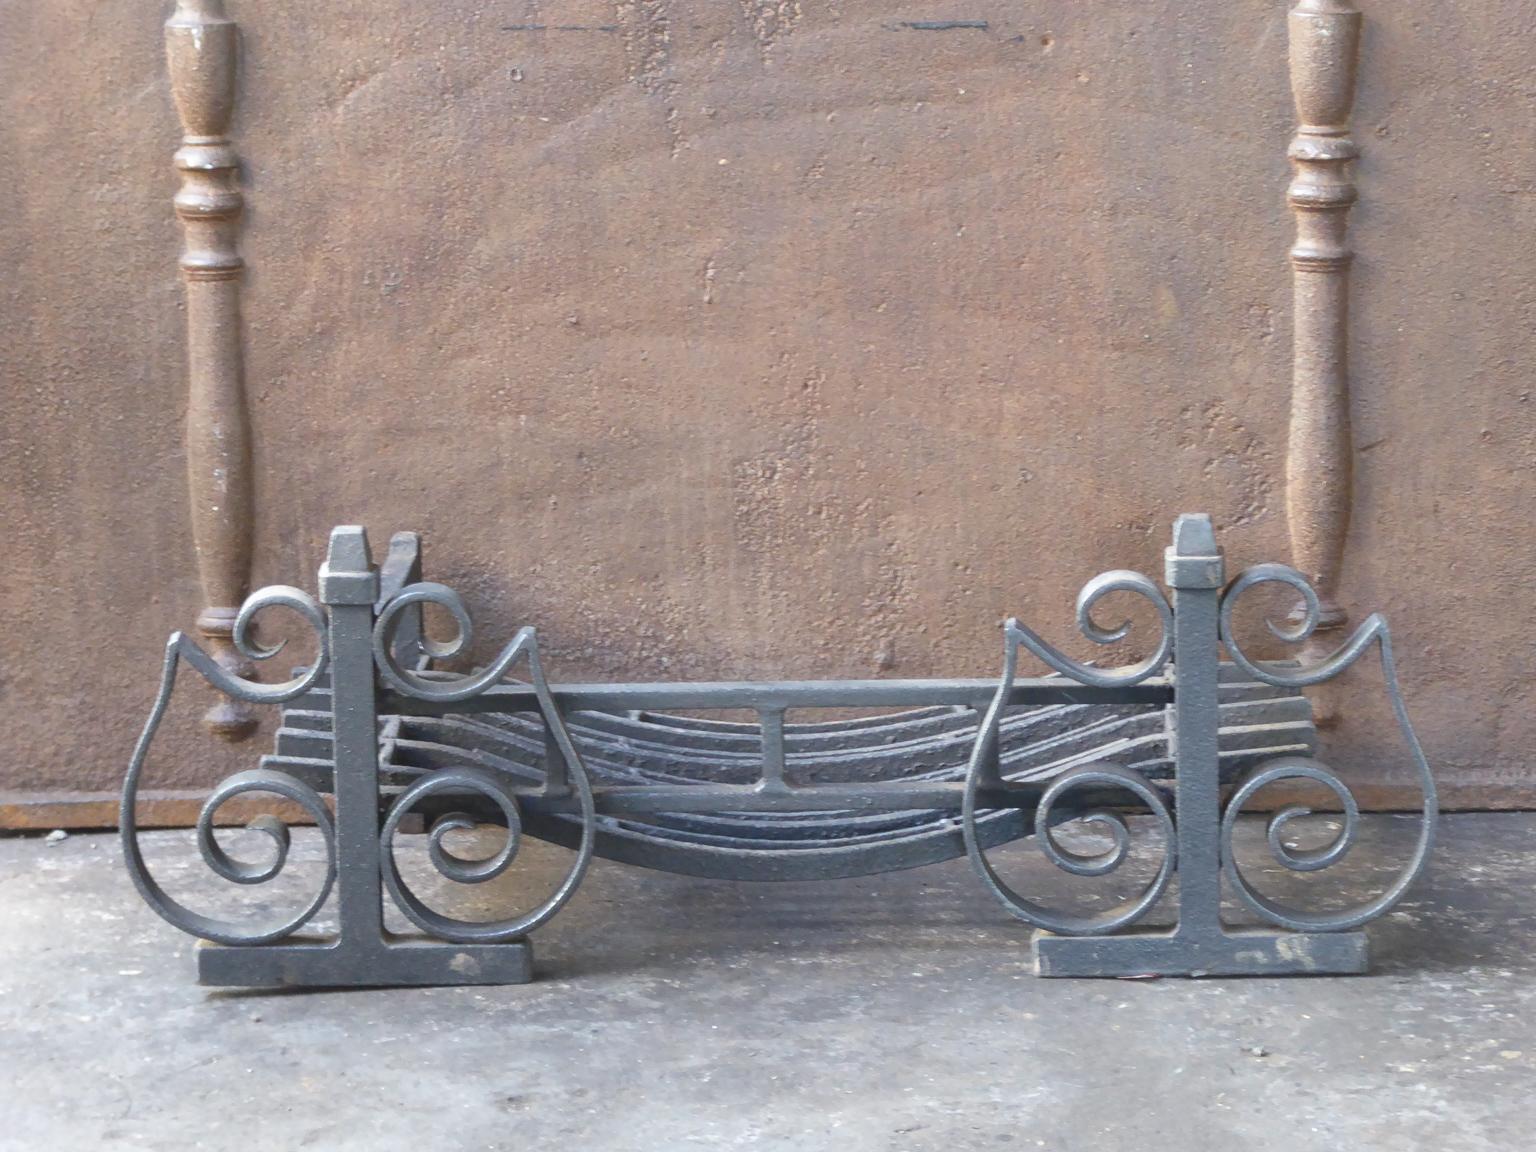 English modernist fireplace basket or fire basket. The fireplace grate is made of wrought iron and cast iron. The total width of the front of the grate is 32 inch (81 cm).

















   